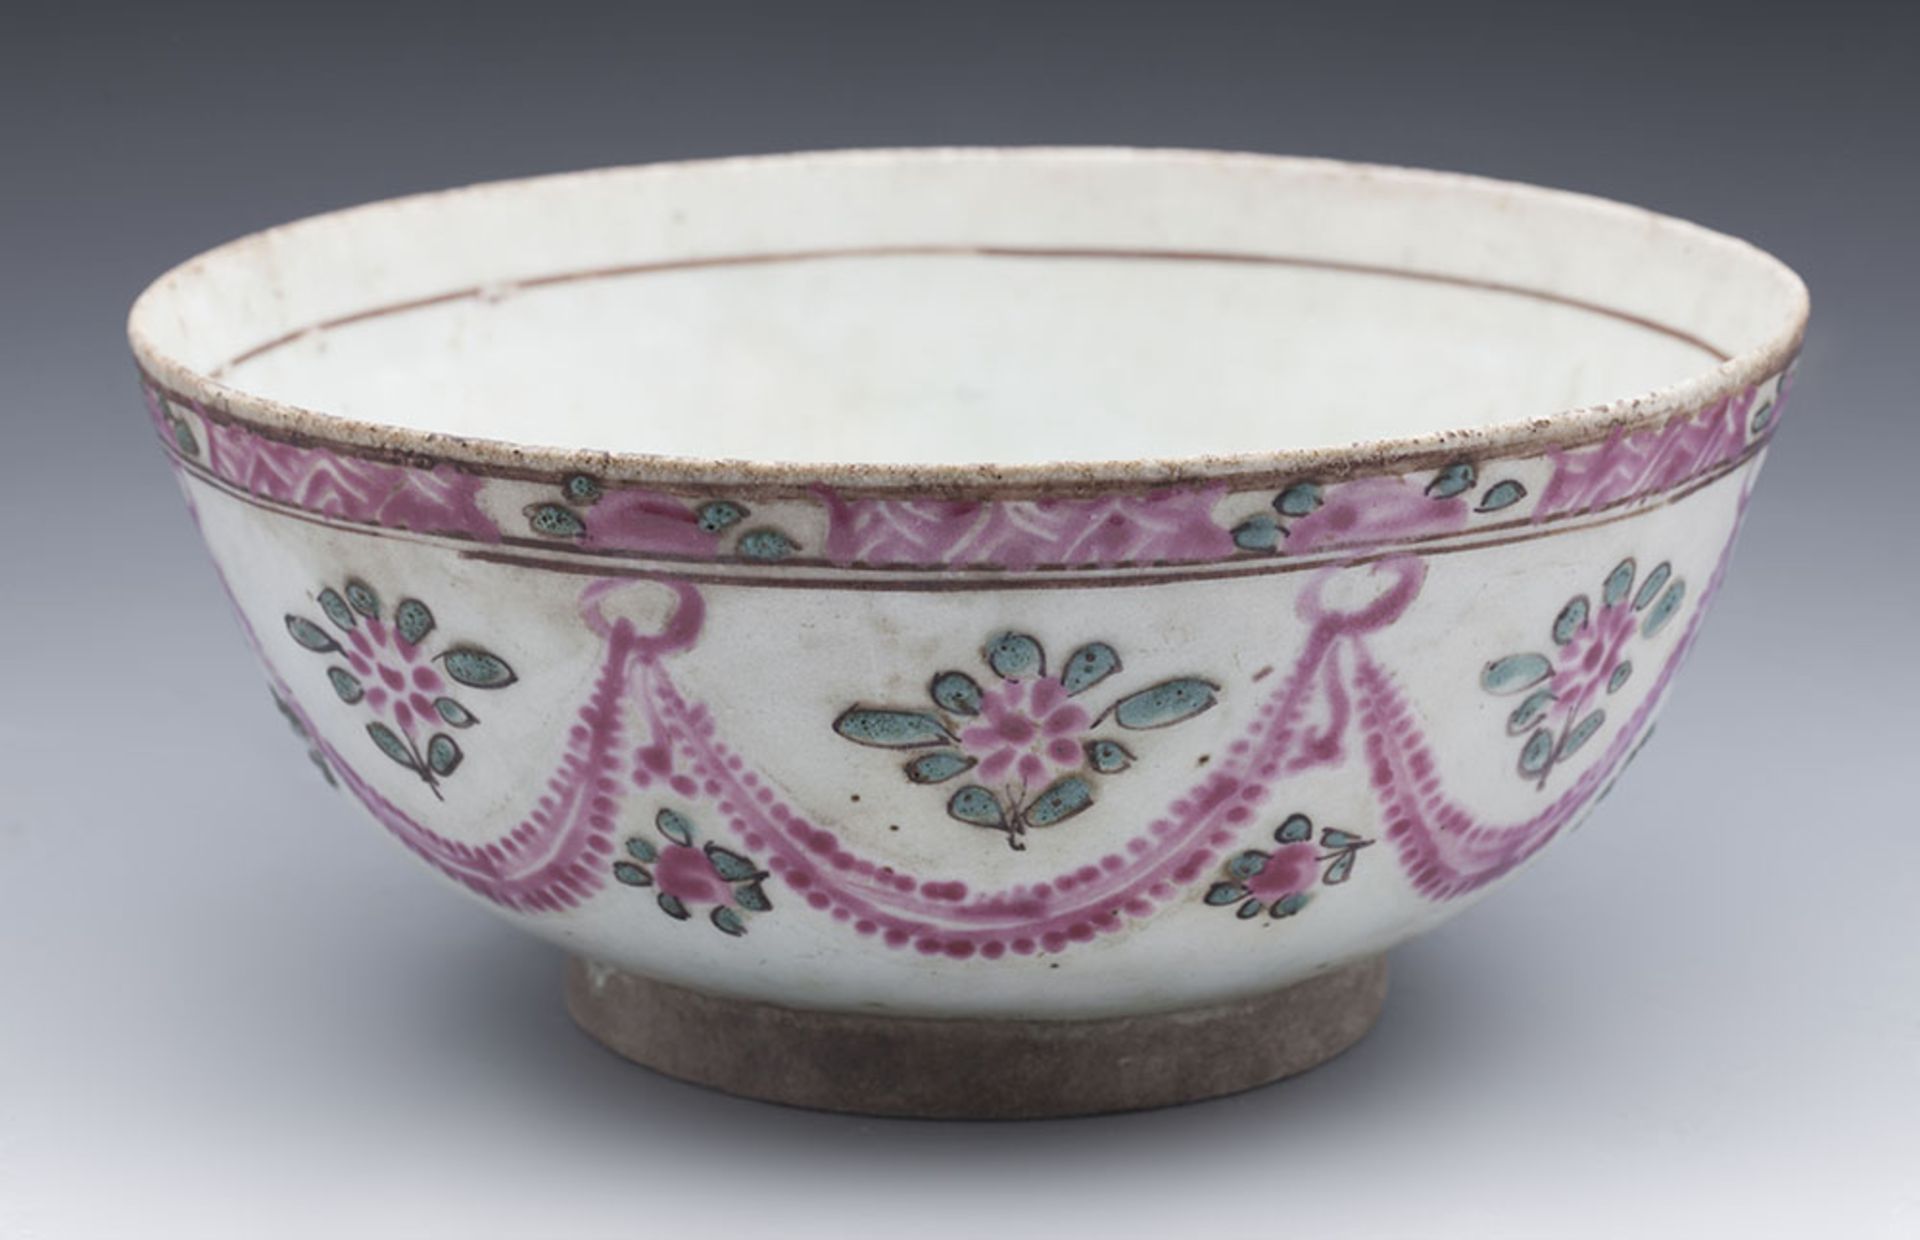 Antique Middle Eastern Bowl With Floral Garlands 17/18Th C. - Image 9 of 9